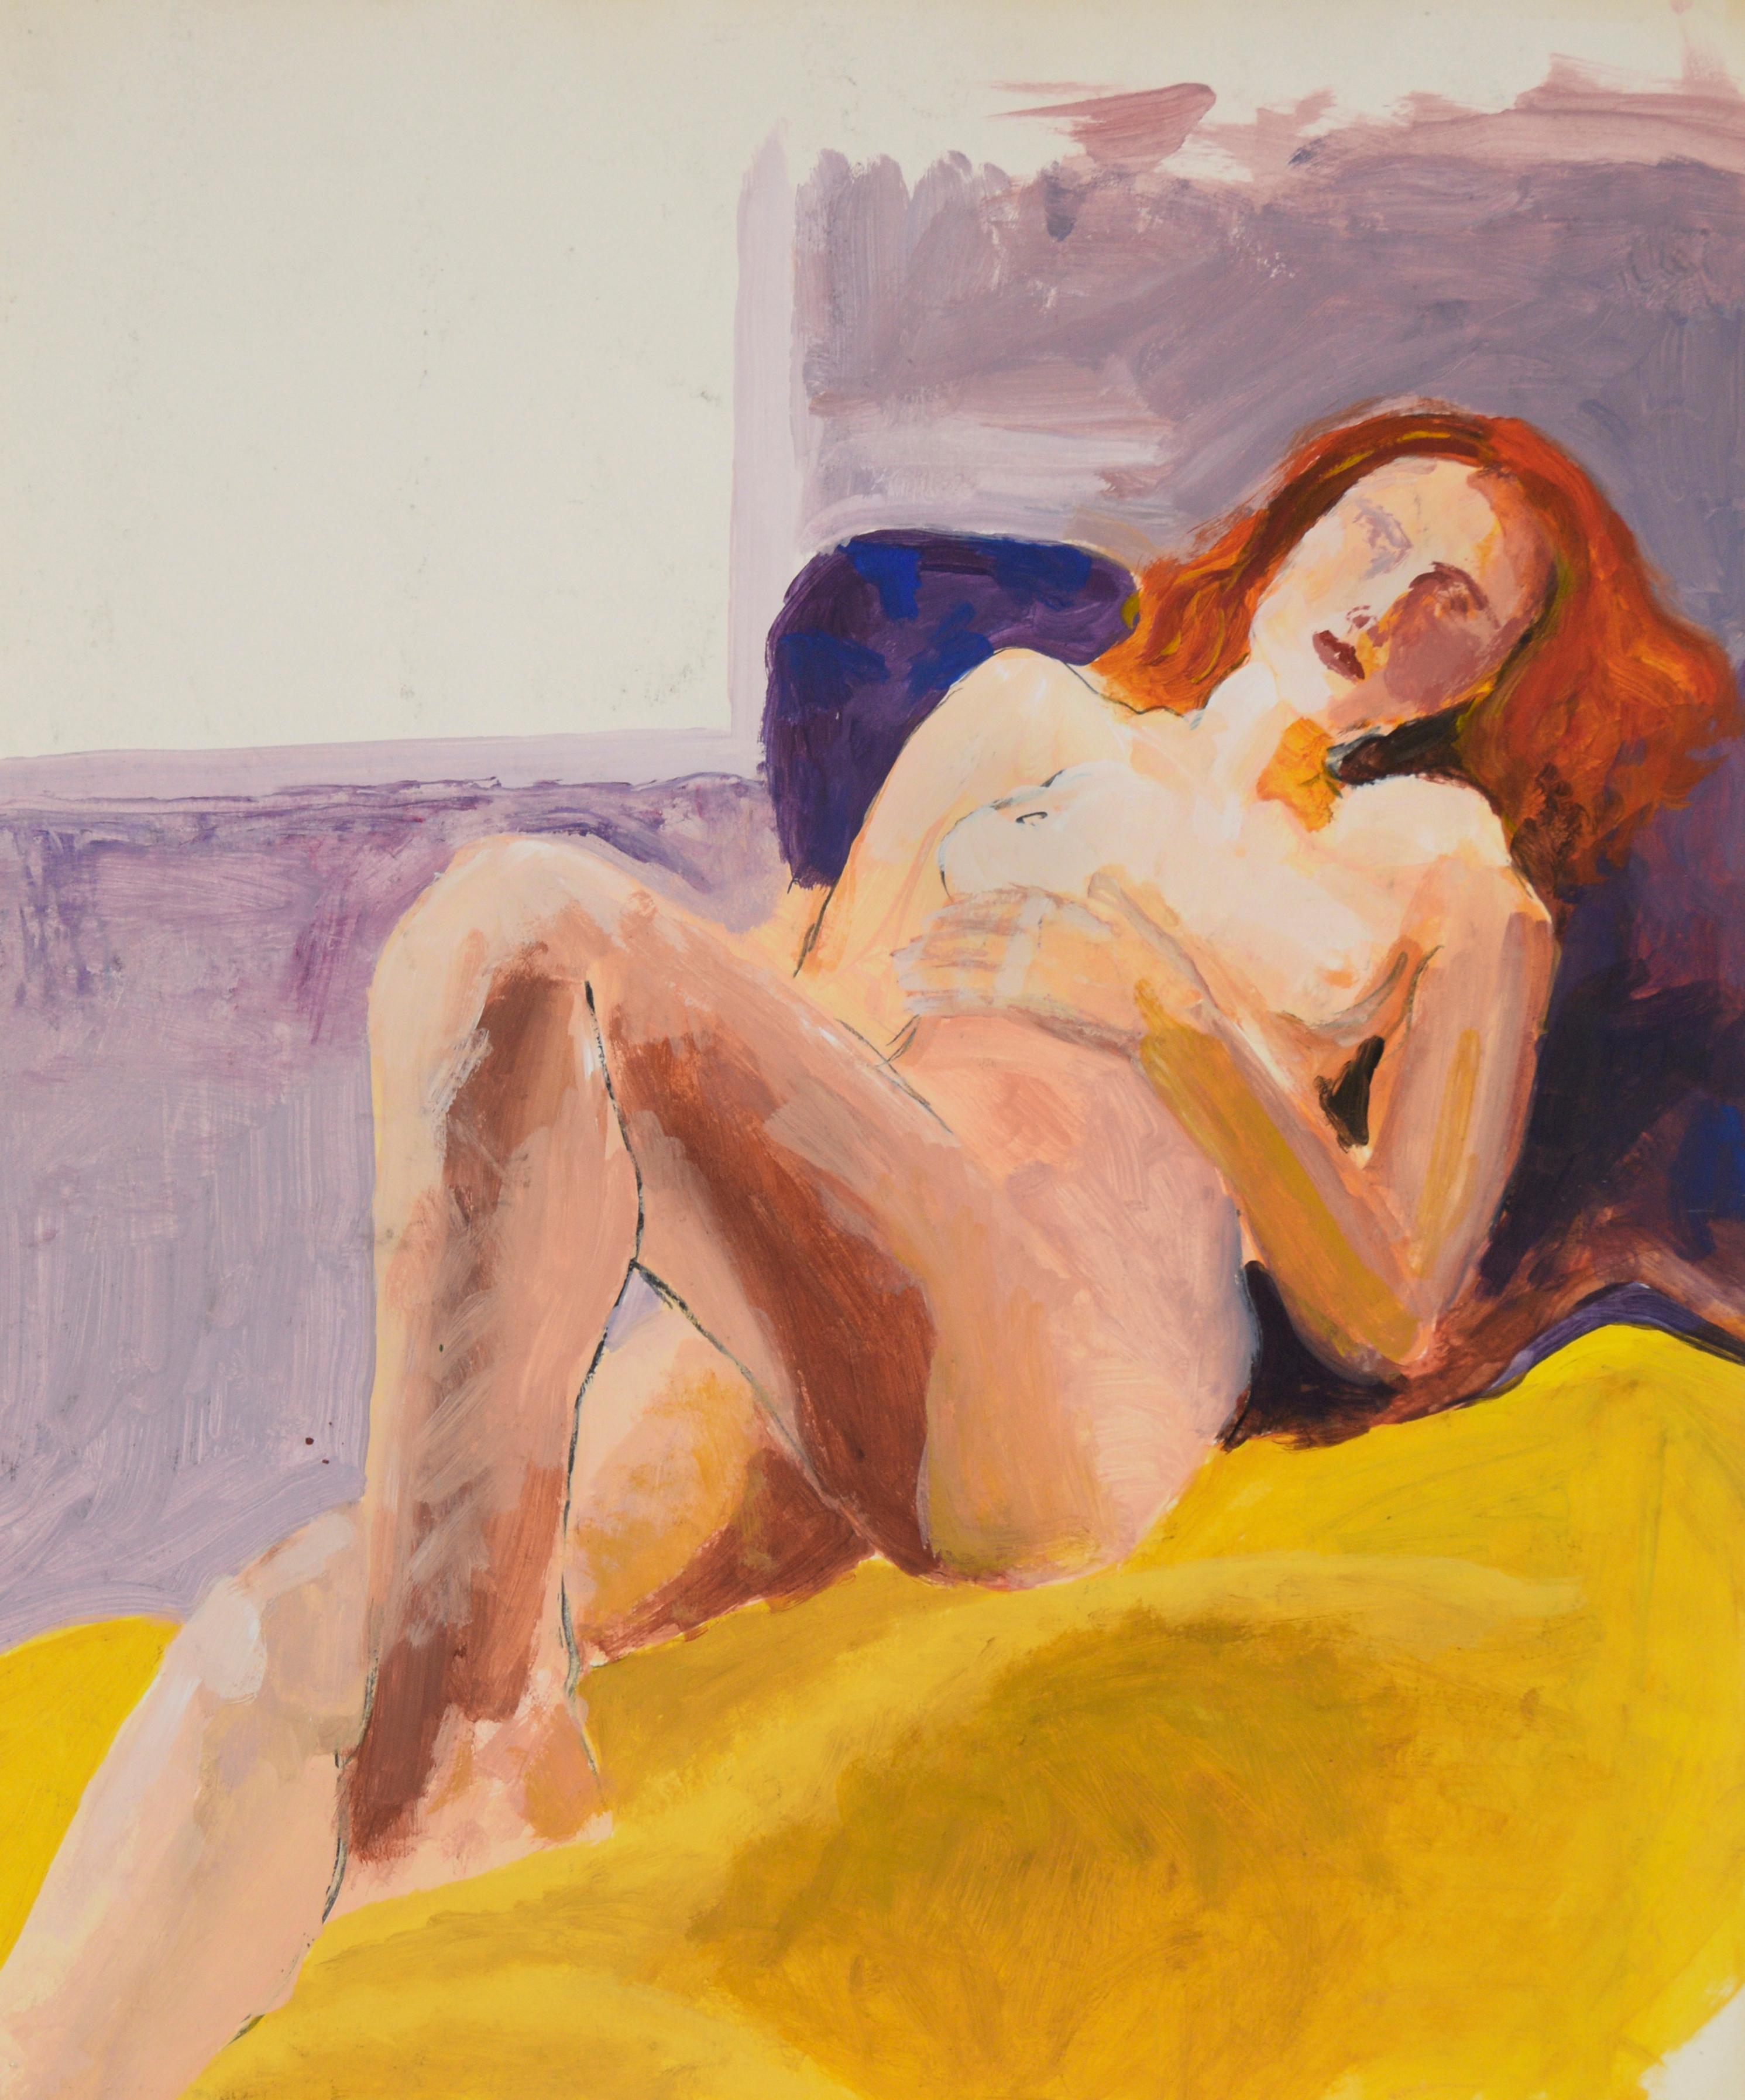 Redhead On A Yellow Blanket - Original Figurative Nude Study

Original San Francisco figurative nude painting depicting a redhead model laying on a yellow blanket. Her hand lays over her chest, with her right leg bent. A purple background contrasts